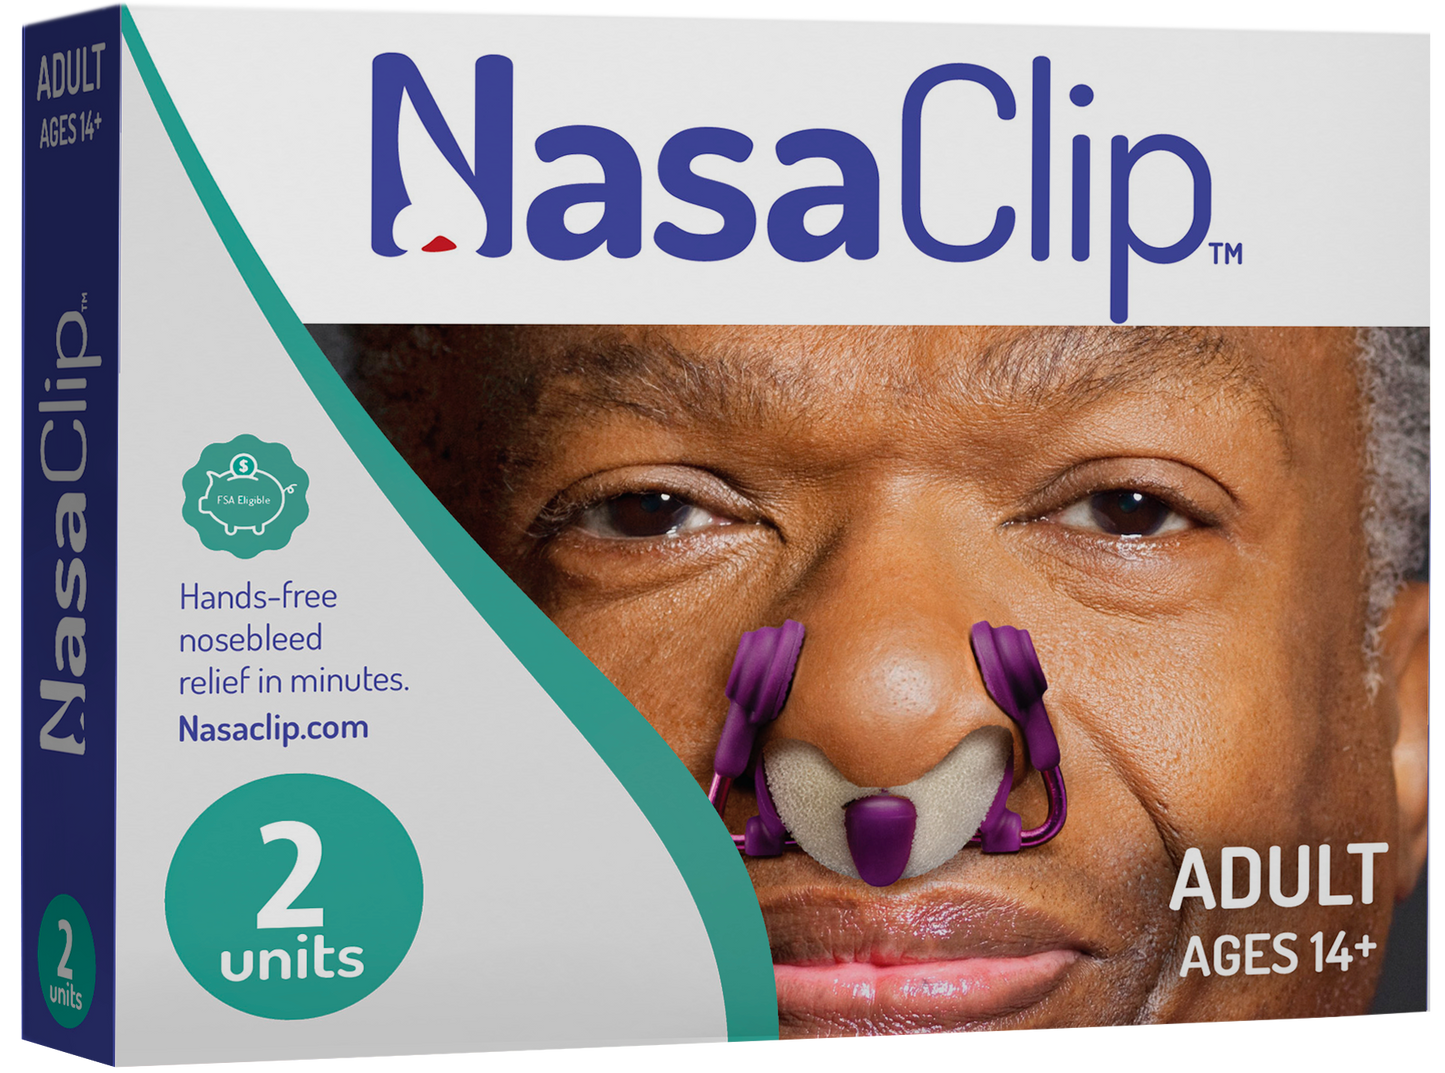 Package of 2 Units of NasaClips. An adult man with brown skin has a NasaClip clipped into his nose. FSA Eligible. NasaClip delivers hands-free nosebleed relief in minutes. 